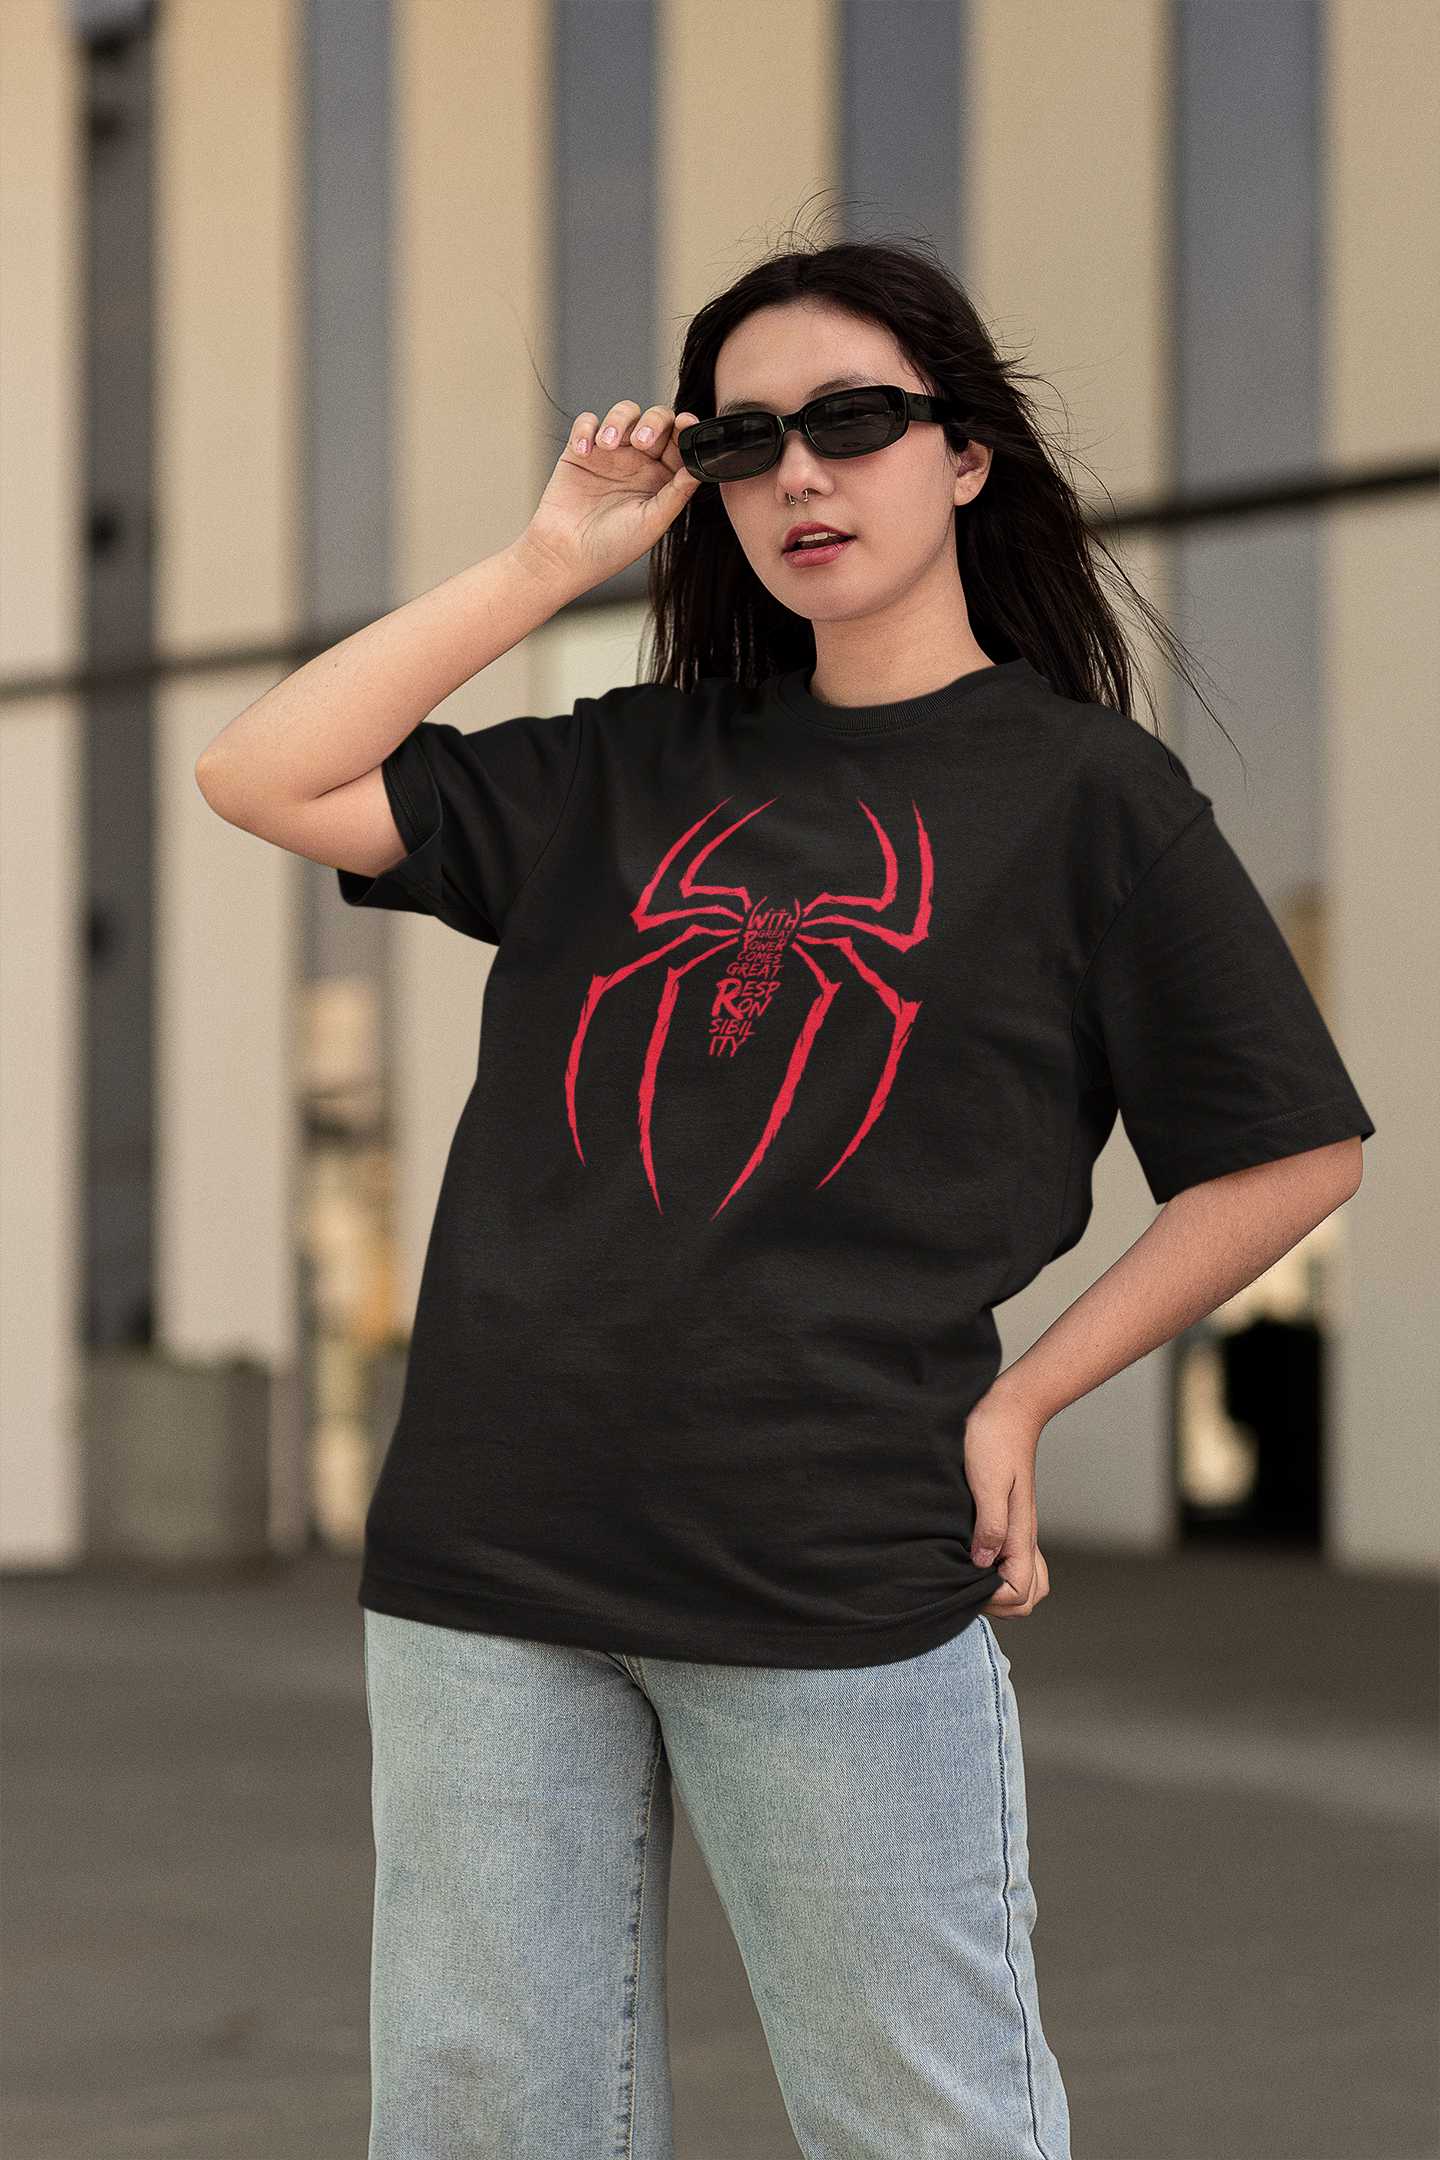 With Great Power Comes Great Responsibility - Oversized T Shirt Strong Soul Shirts & Tops